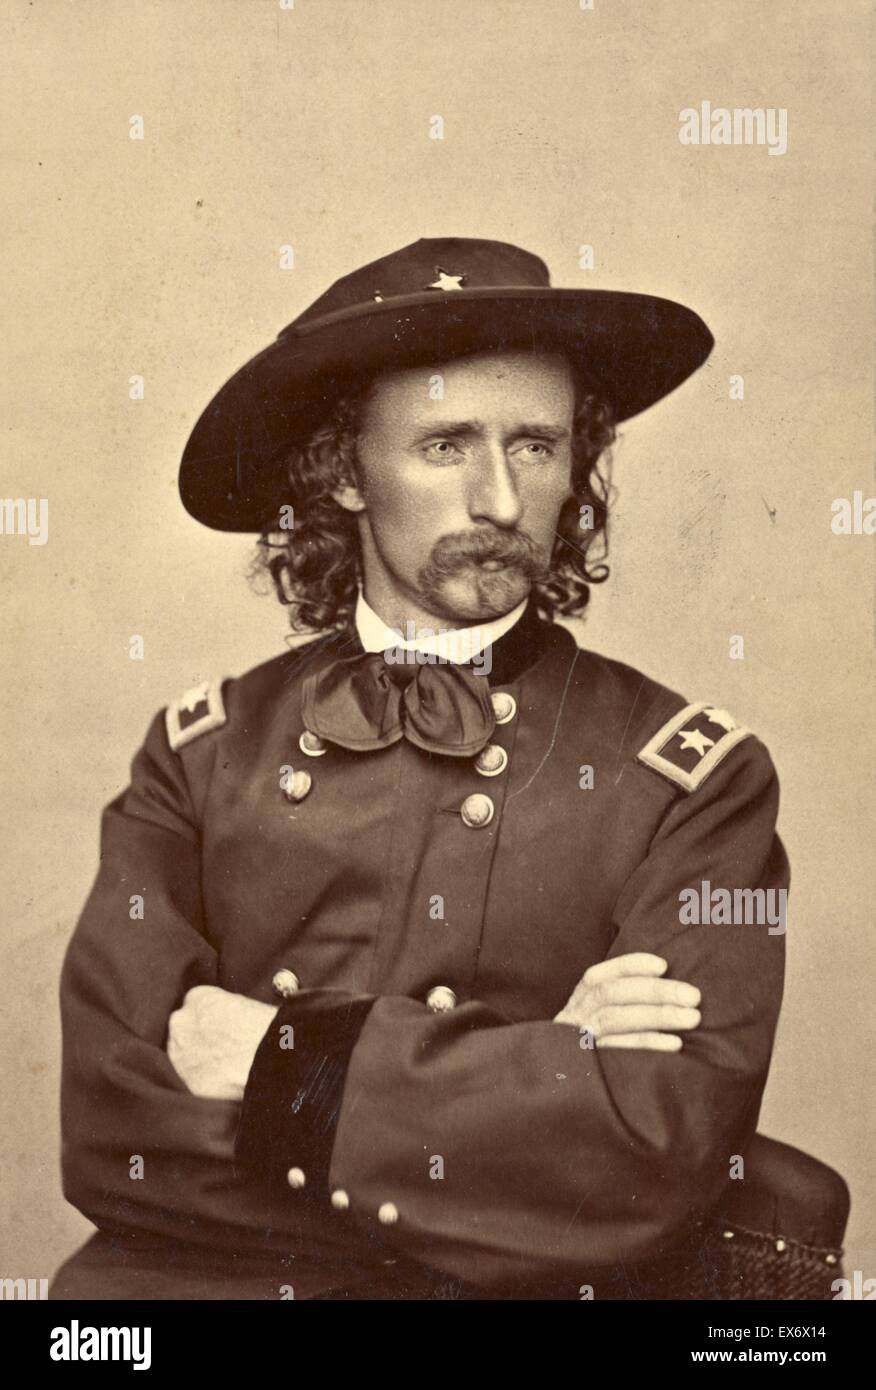 Photographic print of George Armstrong Custer (1839-1876) United States Army officer and cavalry commander in the American Civil War and the American Indian Wars. Dated 1872 Stock Photo